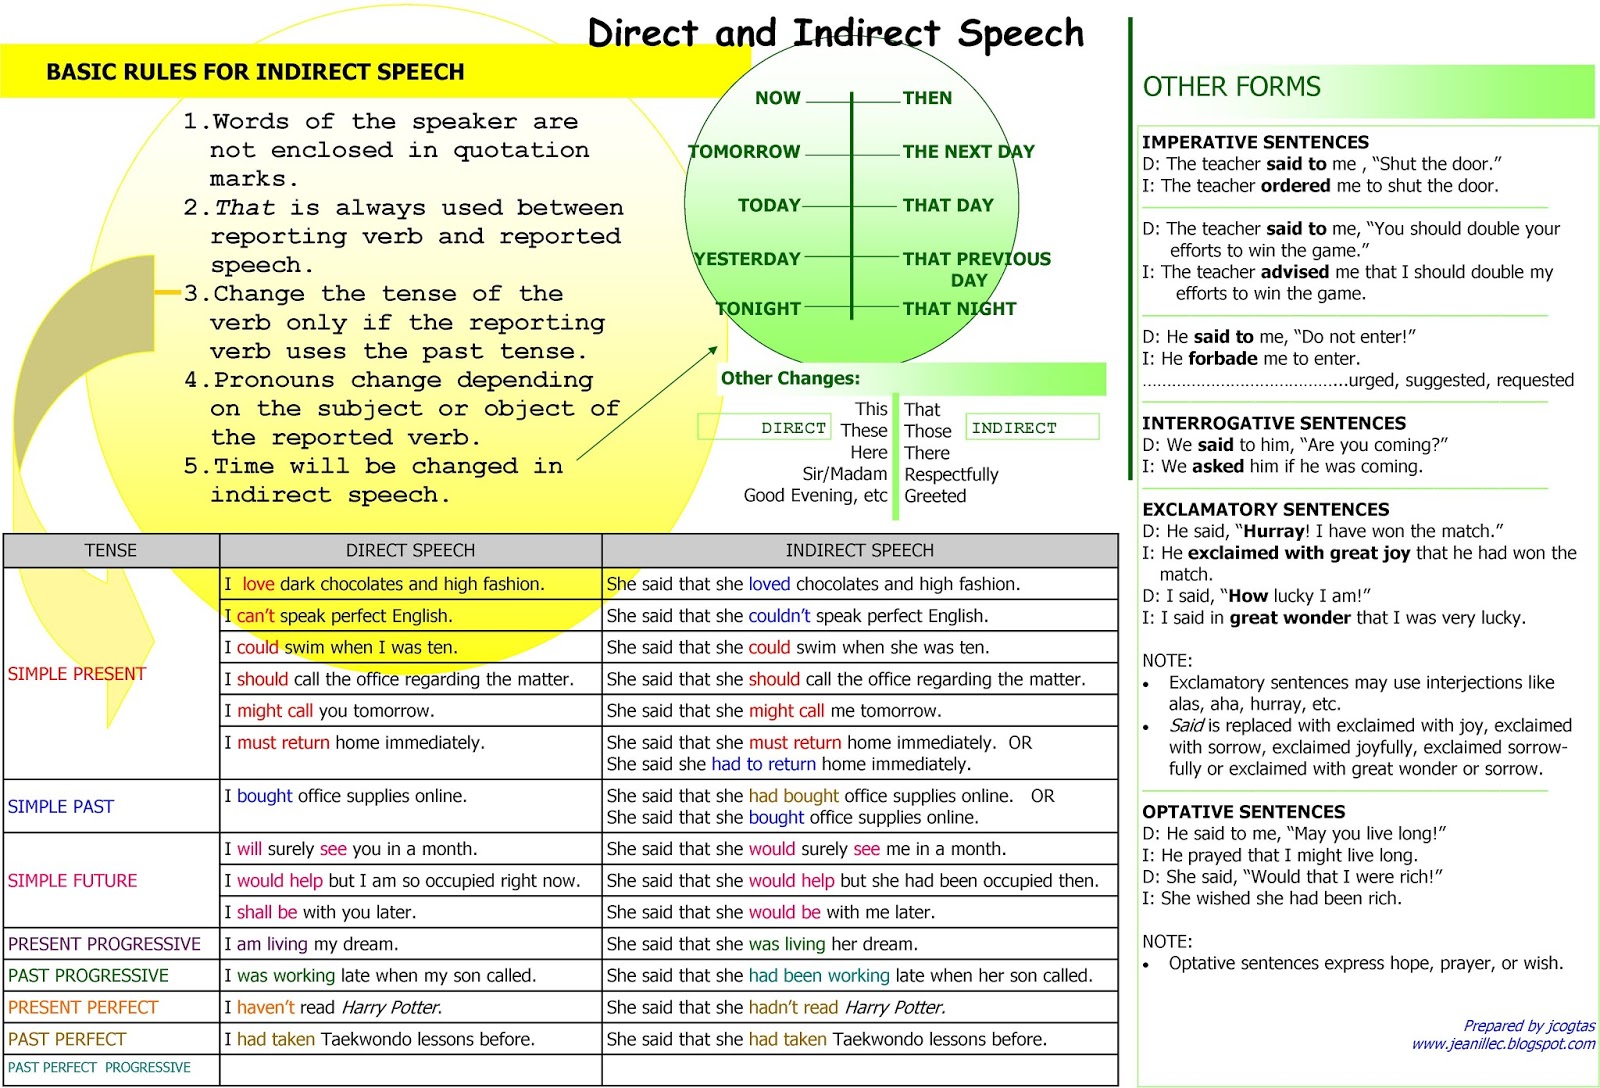 May reported speech. Direct indirect Speech таблица. Таблица direct and reported Speech. Direct indirect reported Speech. Direct Speech reported Speech таблица.